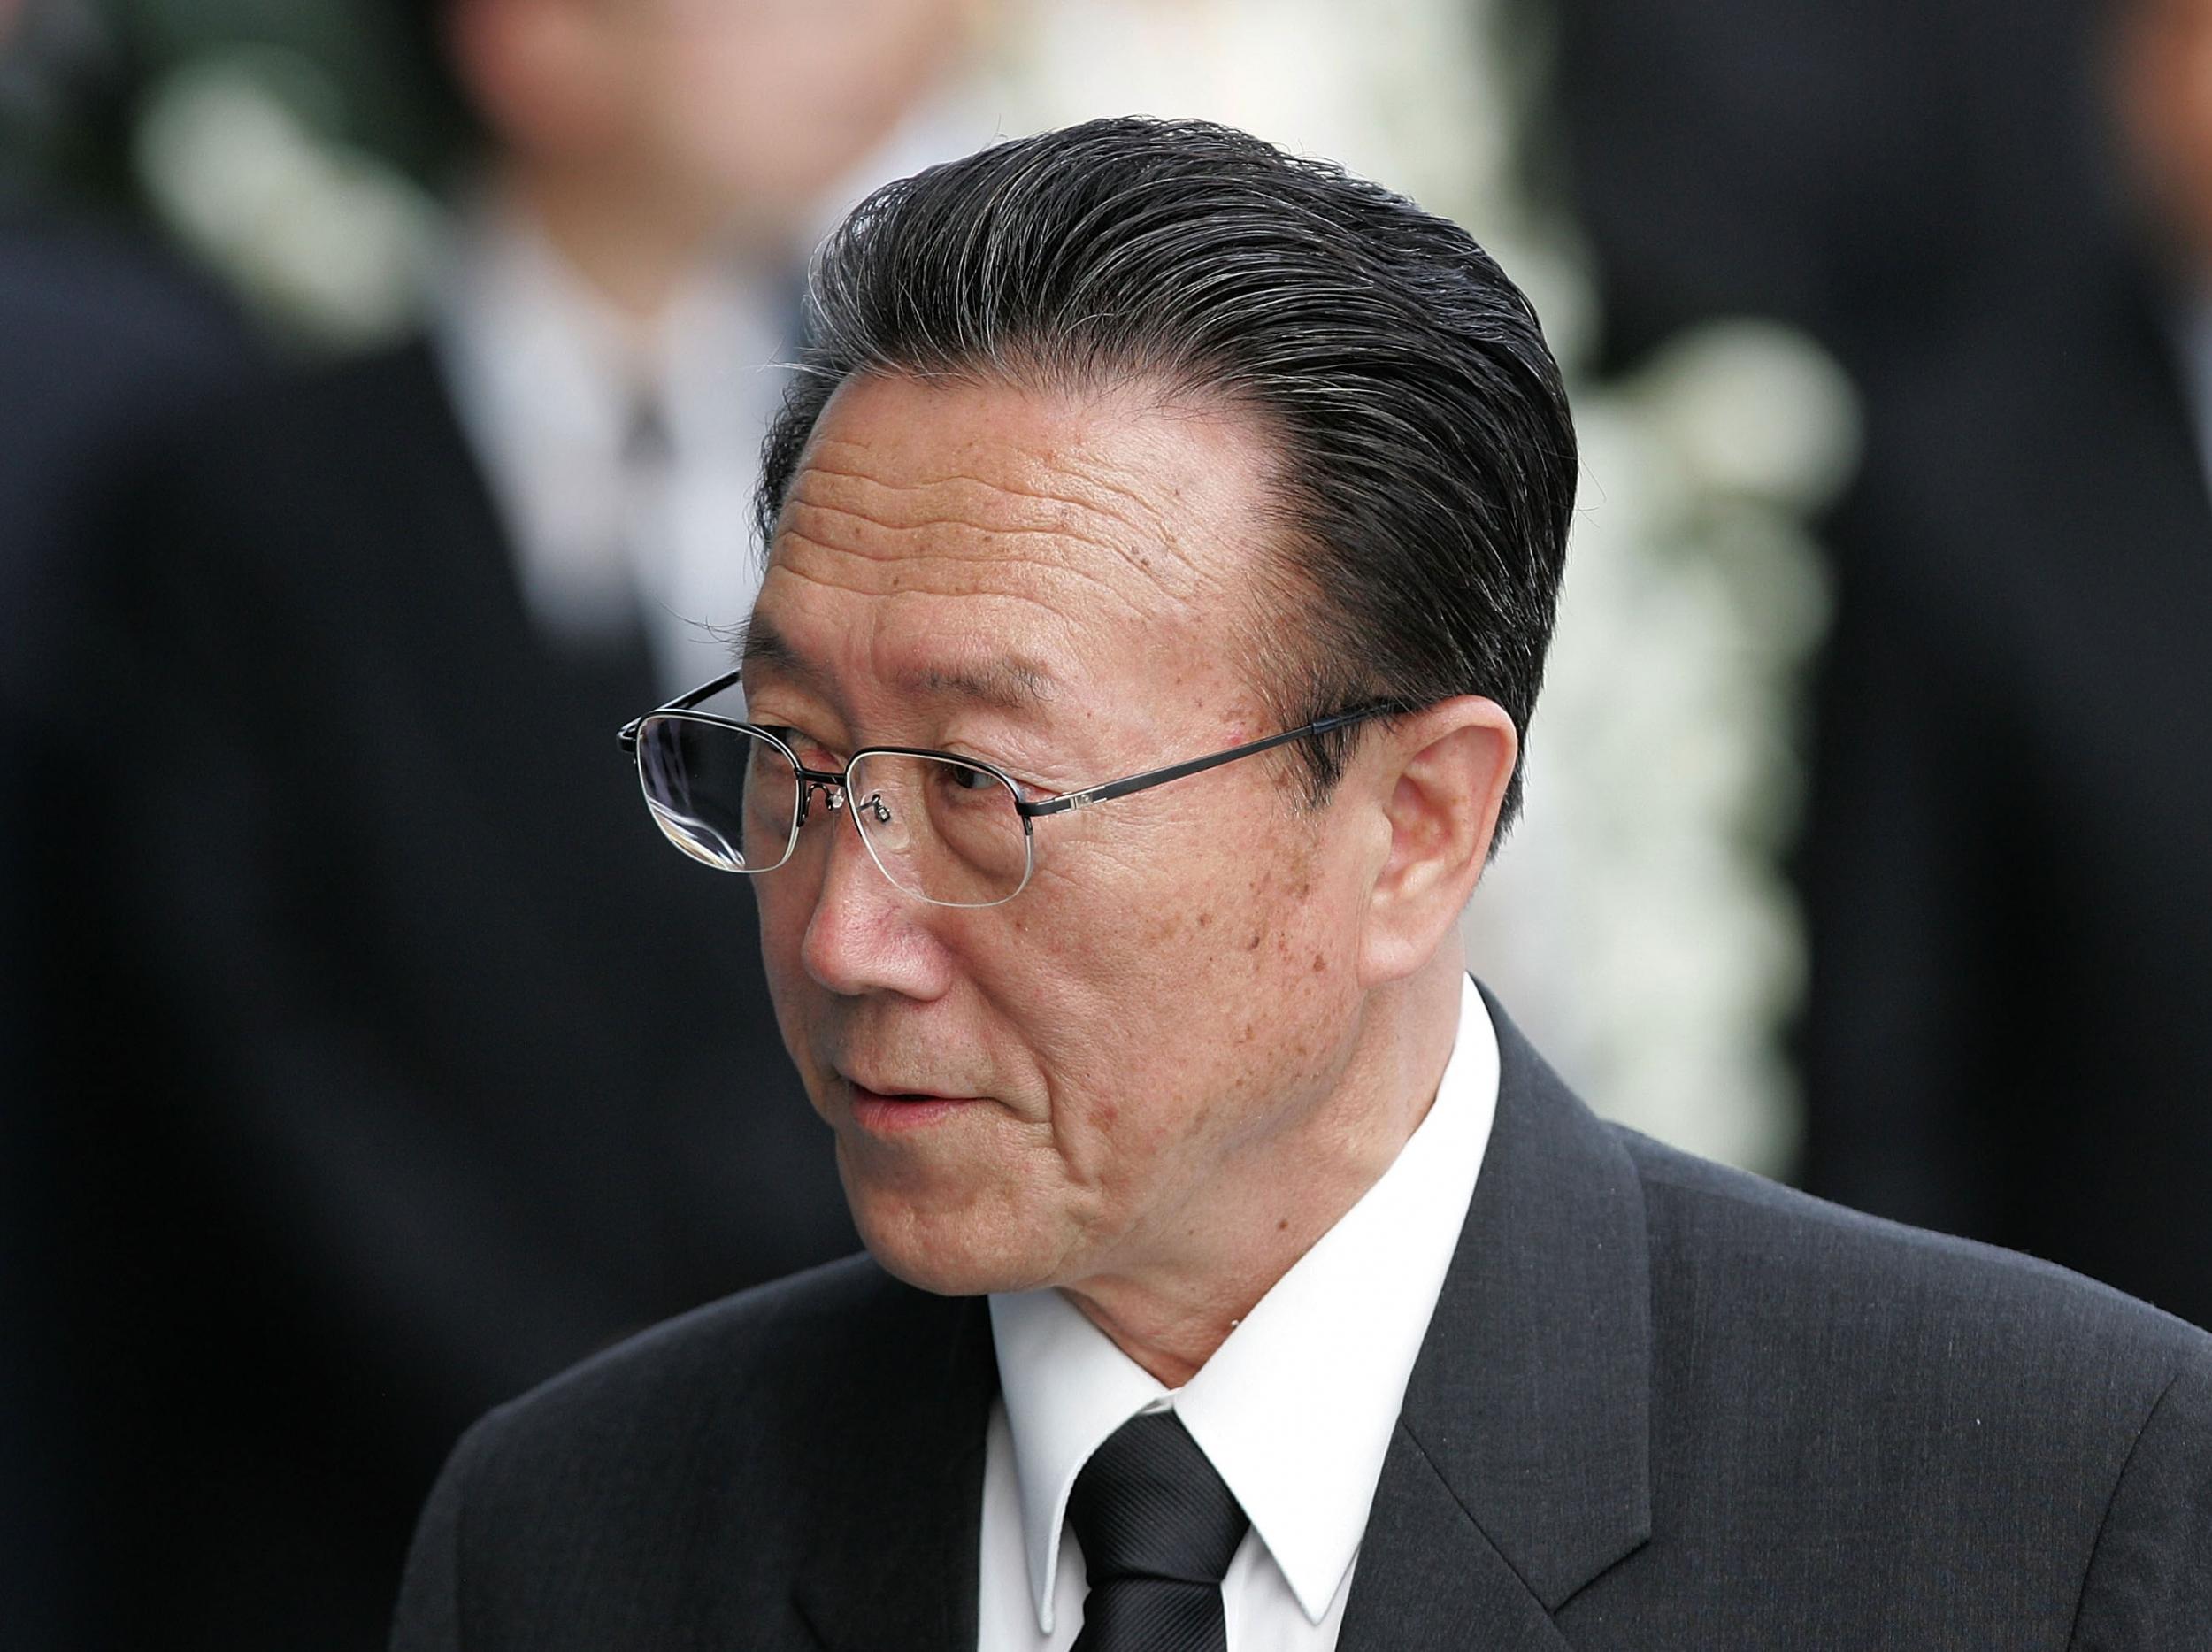 Kim Yang-gon was a top aide in the leader's government